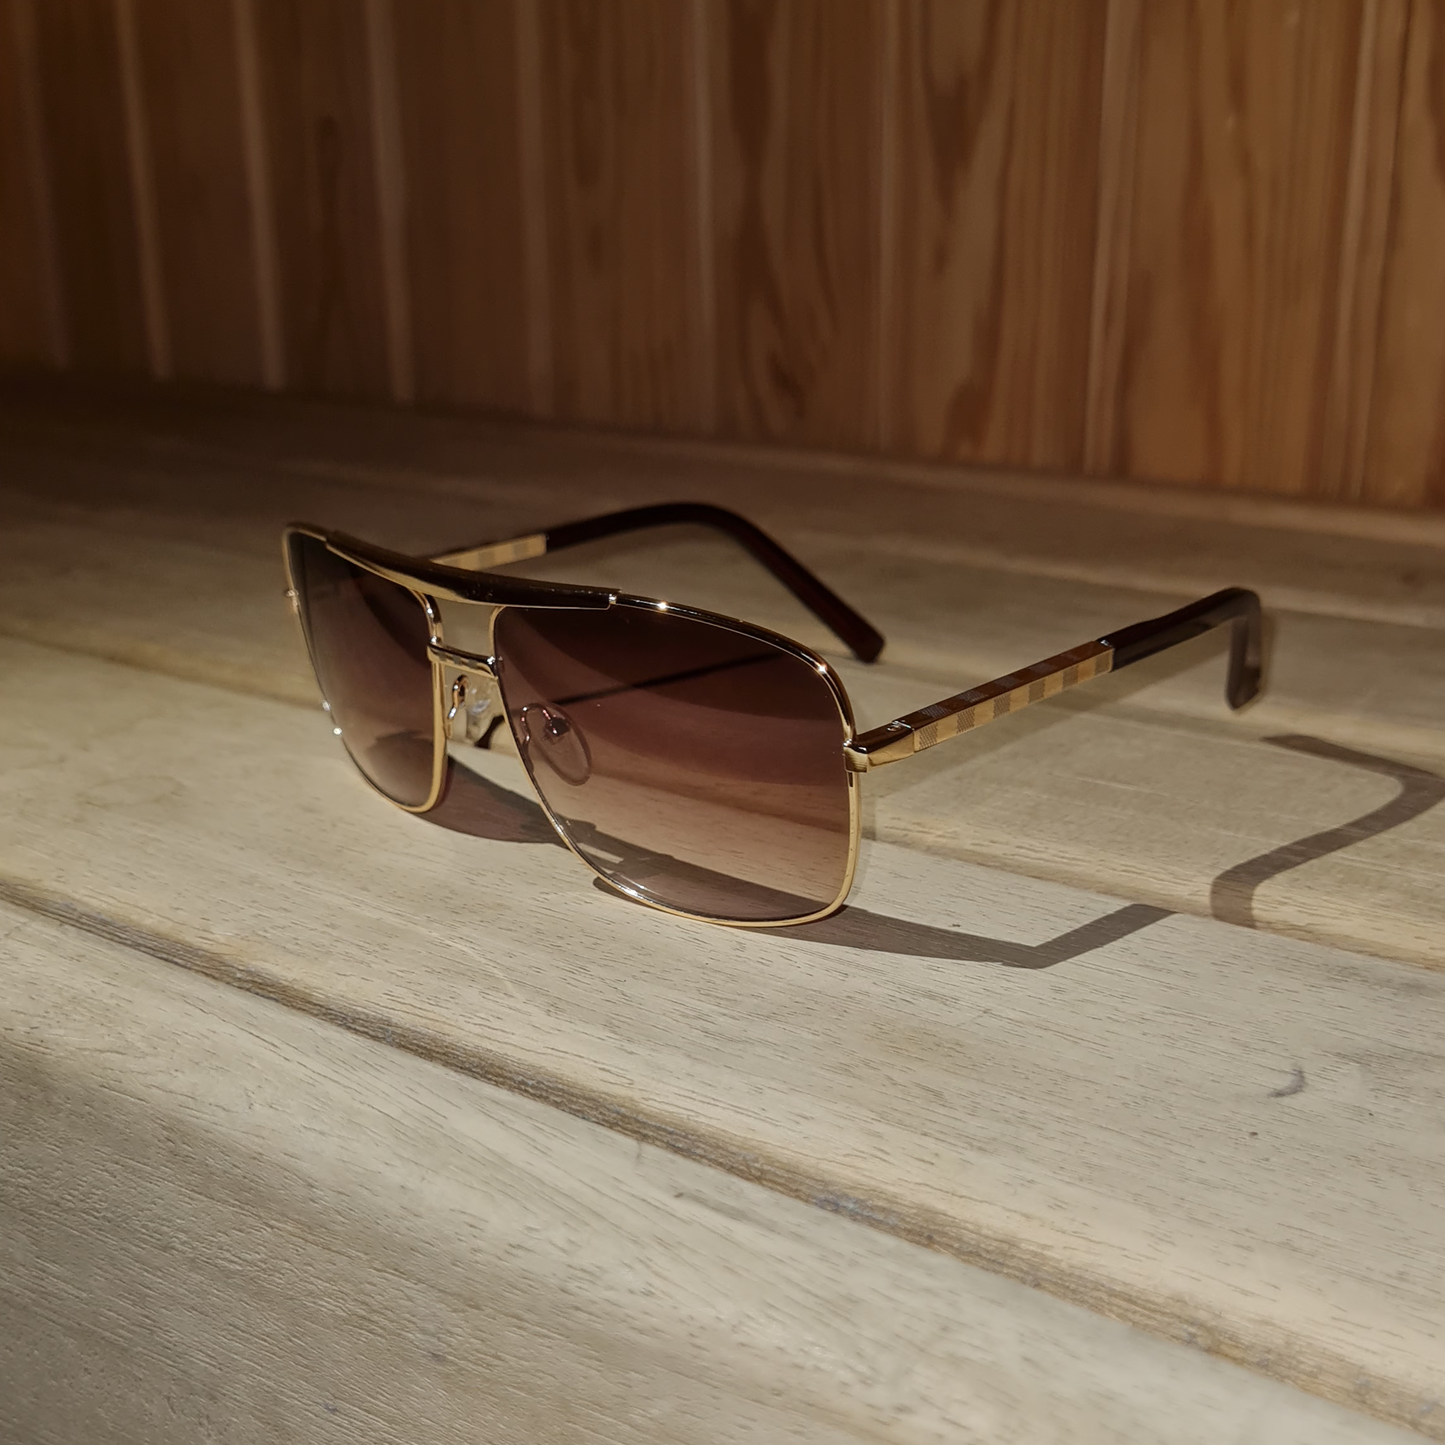 Andrew Tate Sunglasses Gold/Brown | Andrew Tate Sunglasses | Tate Sunglasses